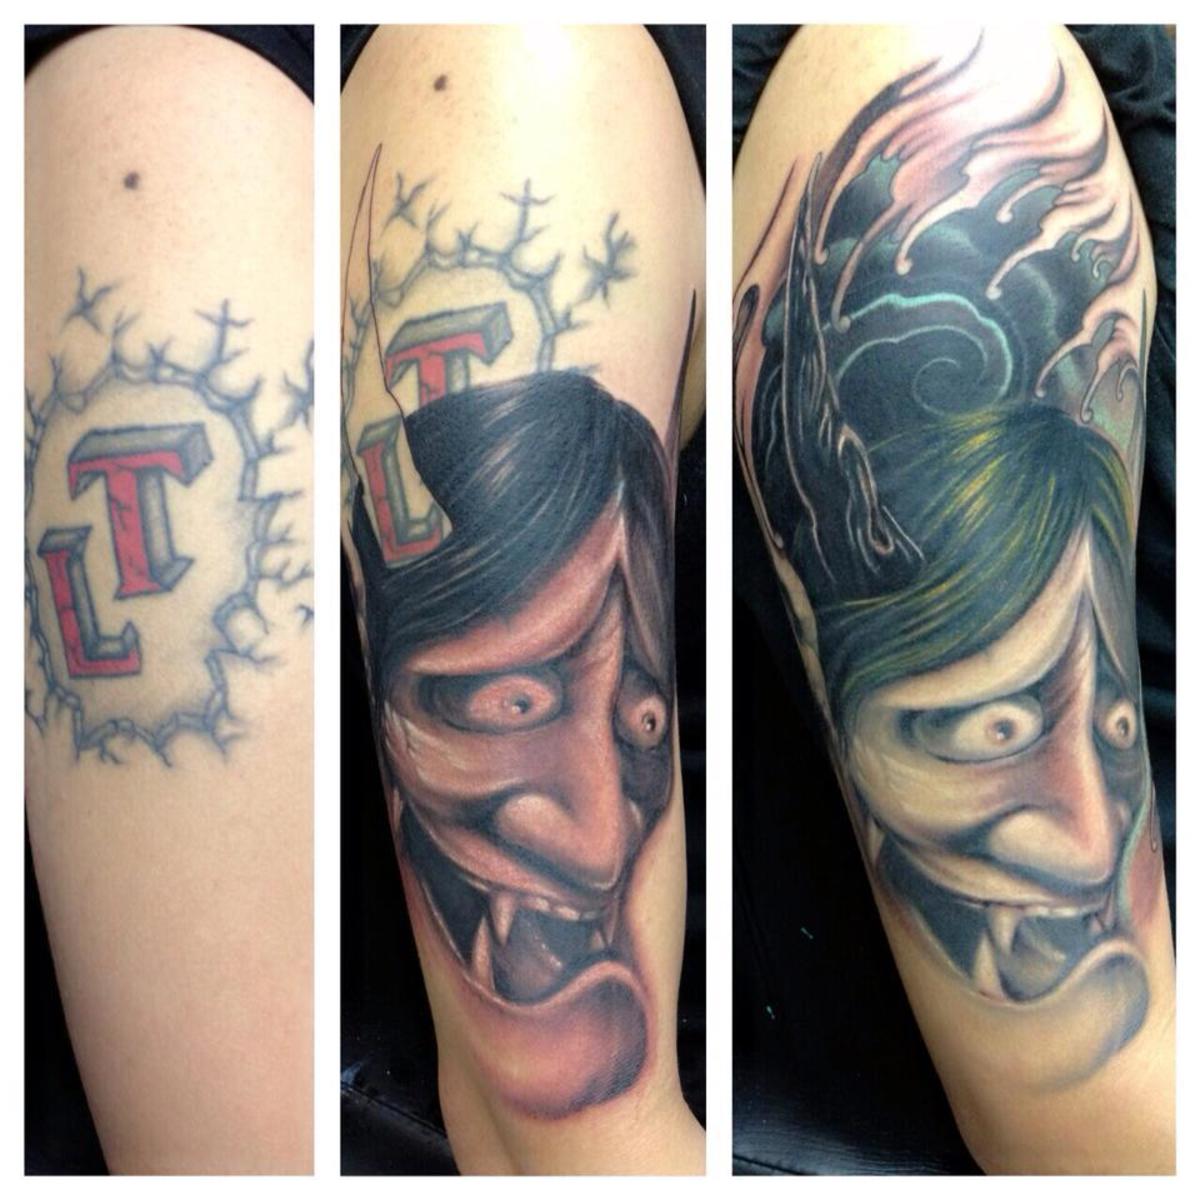 The use of the colour black has worked well with this tattoo, and the face draws the eye away from the cover-up itself.